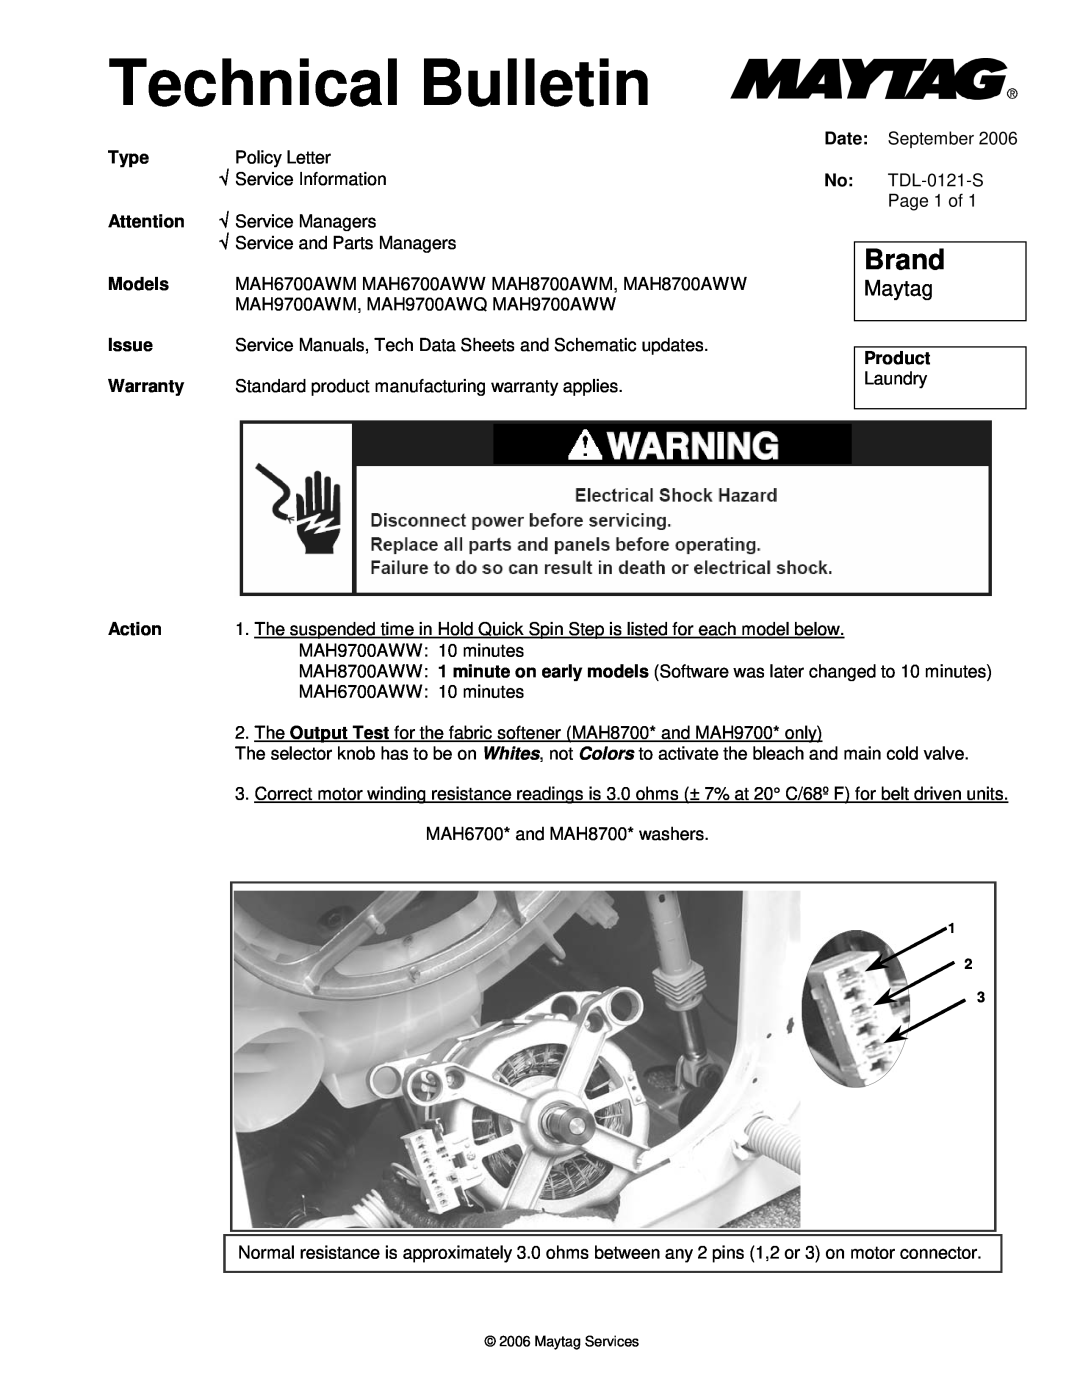 Whirlpool MAH9700AWQ service manual Technical Bulletin, Brand, Maytag, Type, Models, Issue, Warranty, Product, Action 